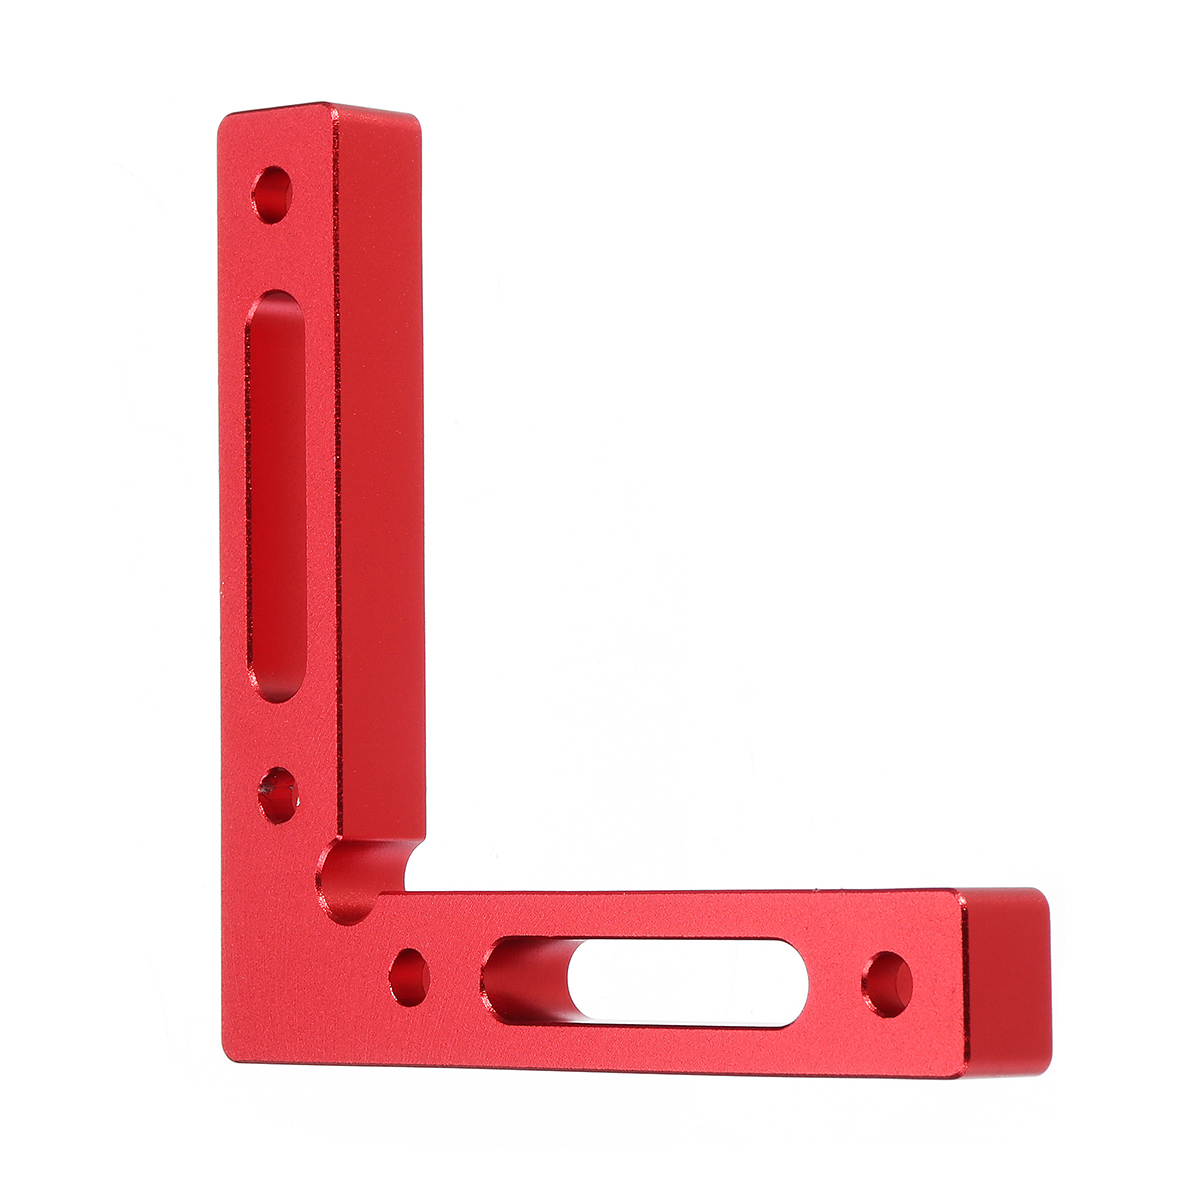 L-Shape-Clamp-90-Degree-Square-Right-Angle-Corner-Wood-Metal-Welding-Multifunctional-Tools-1543730-2